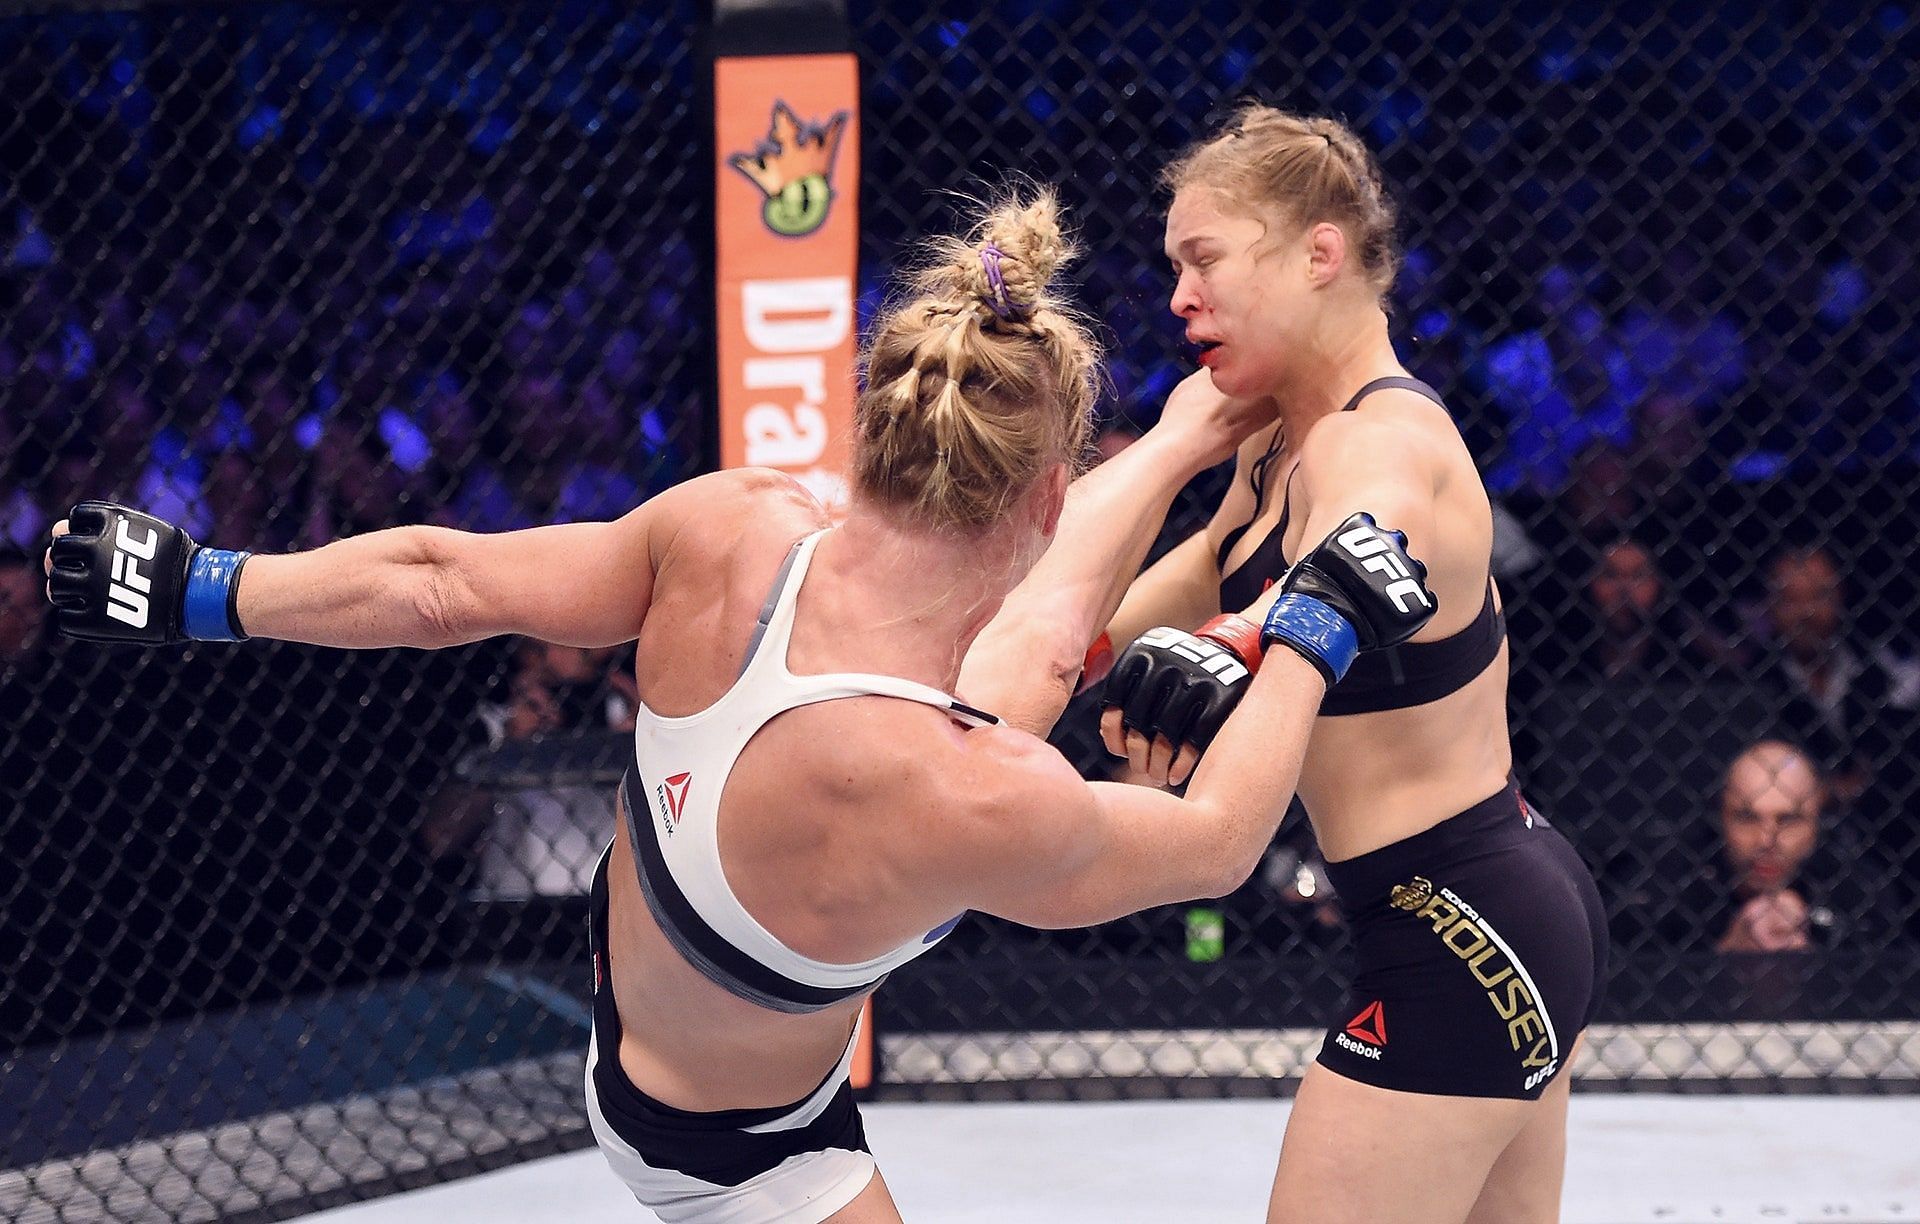 Holly Holm&#039;s win over Ronda Rousey is one of the most replayed UFC moments of all time